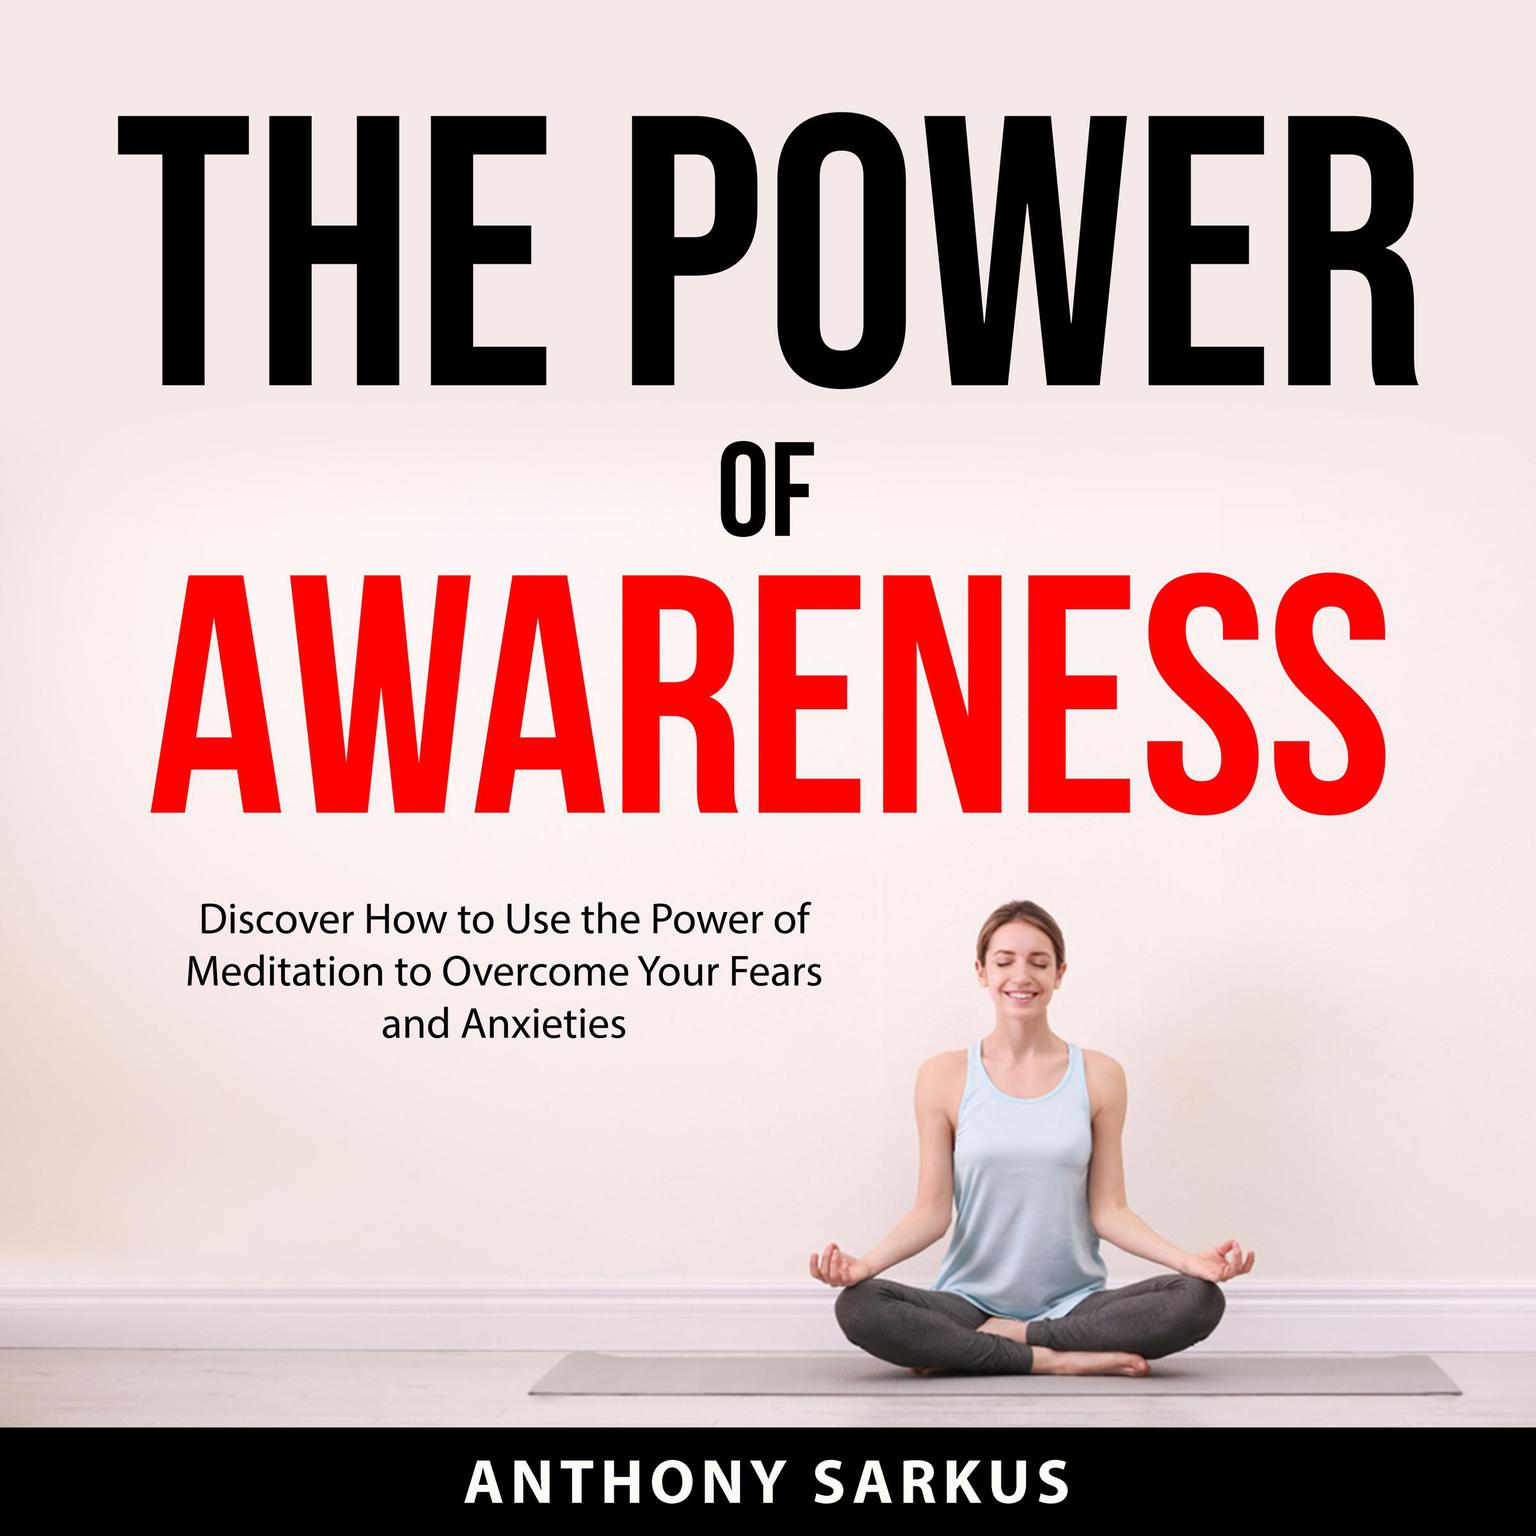 The Power of Awareness Audiobook, by Anthony Sarkus